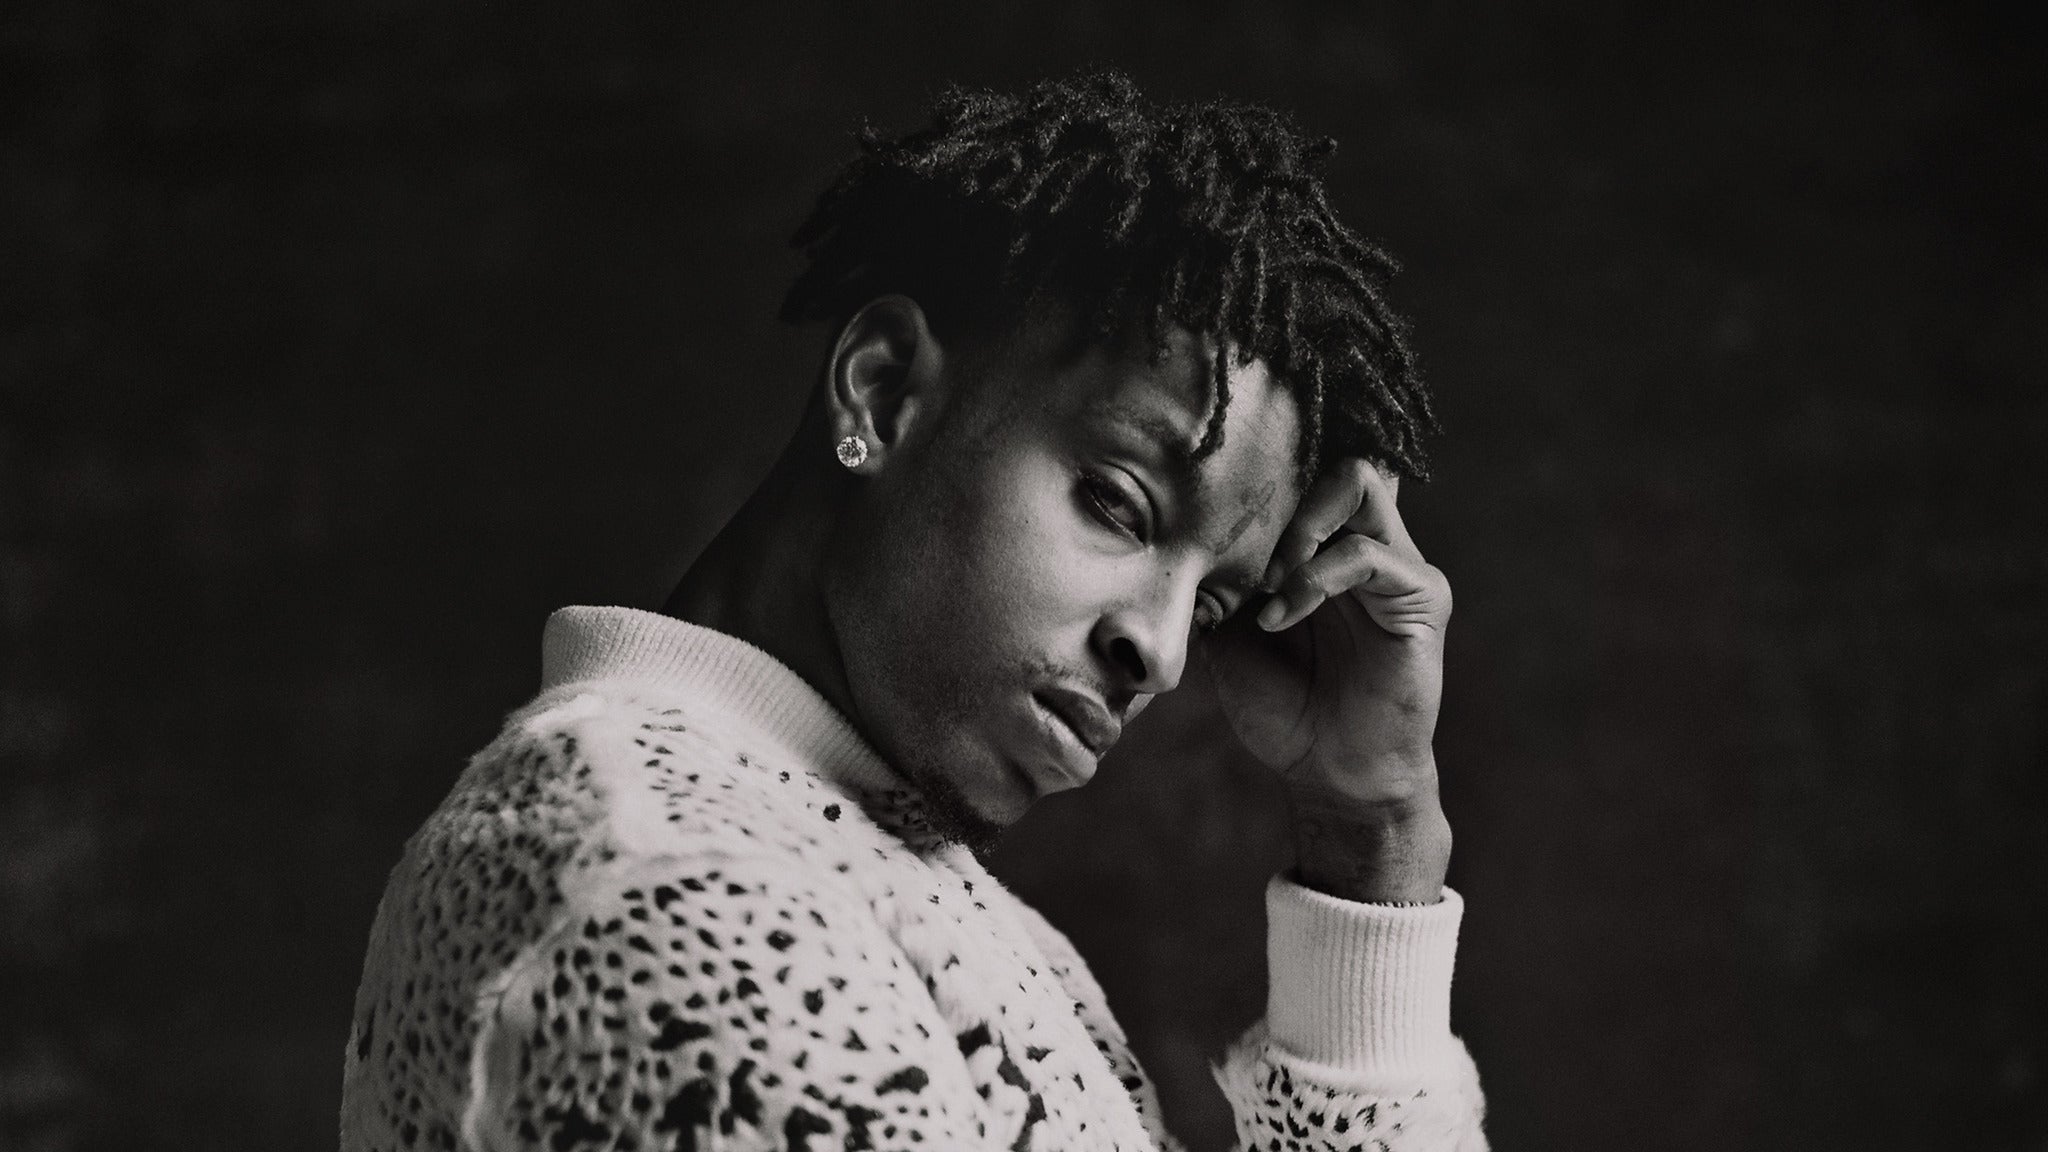 21 Savage Signs A Deal With Epic Records – Music On The Dot